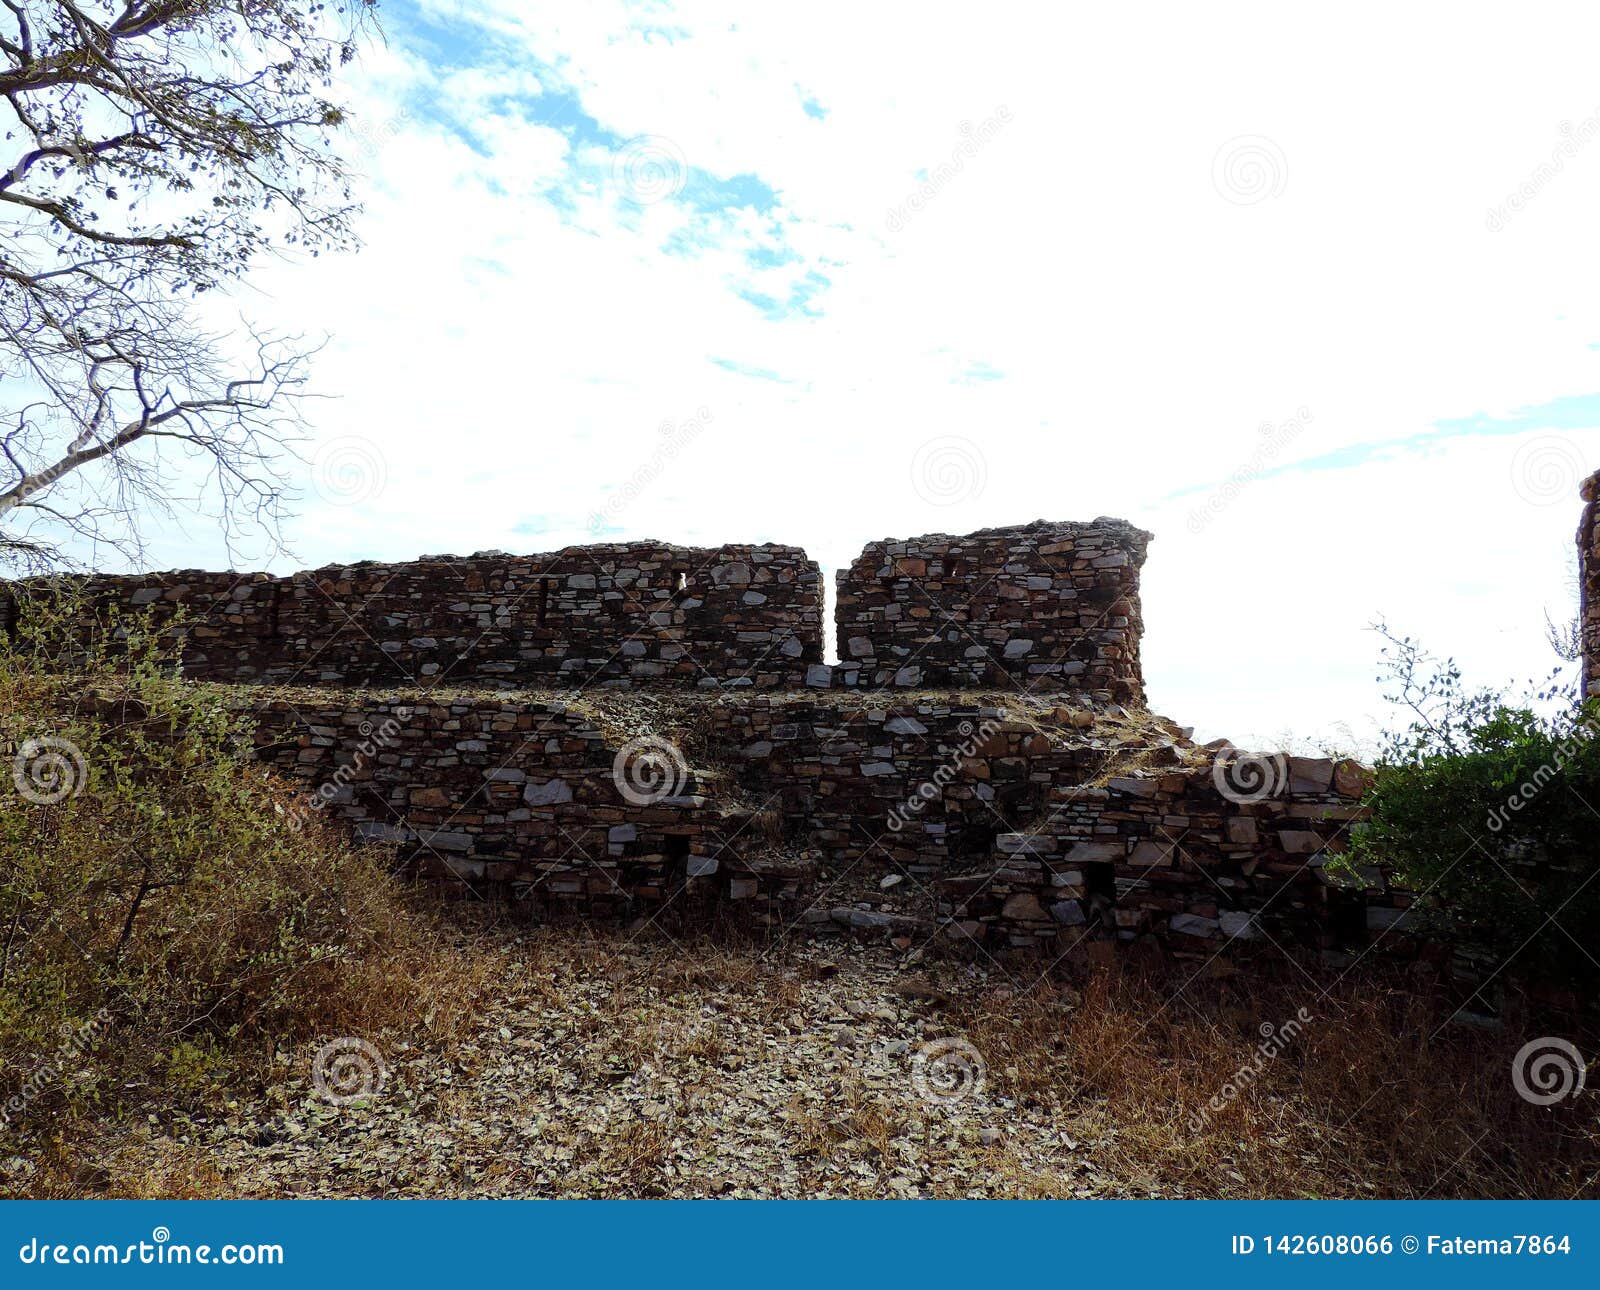 remants of the fort of king ratan singh in madhya pradesh, india